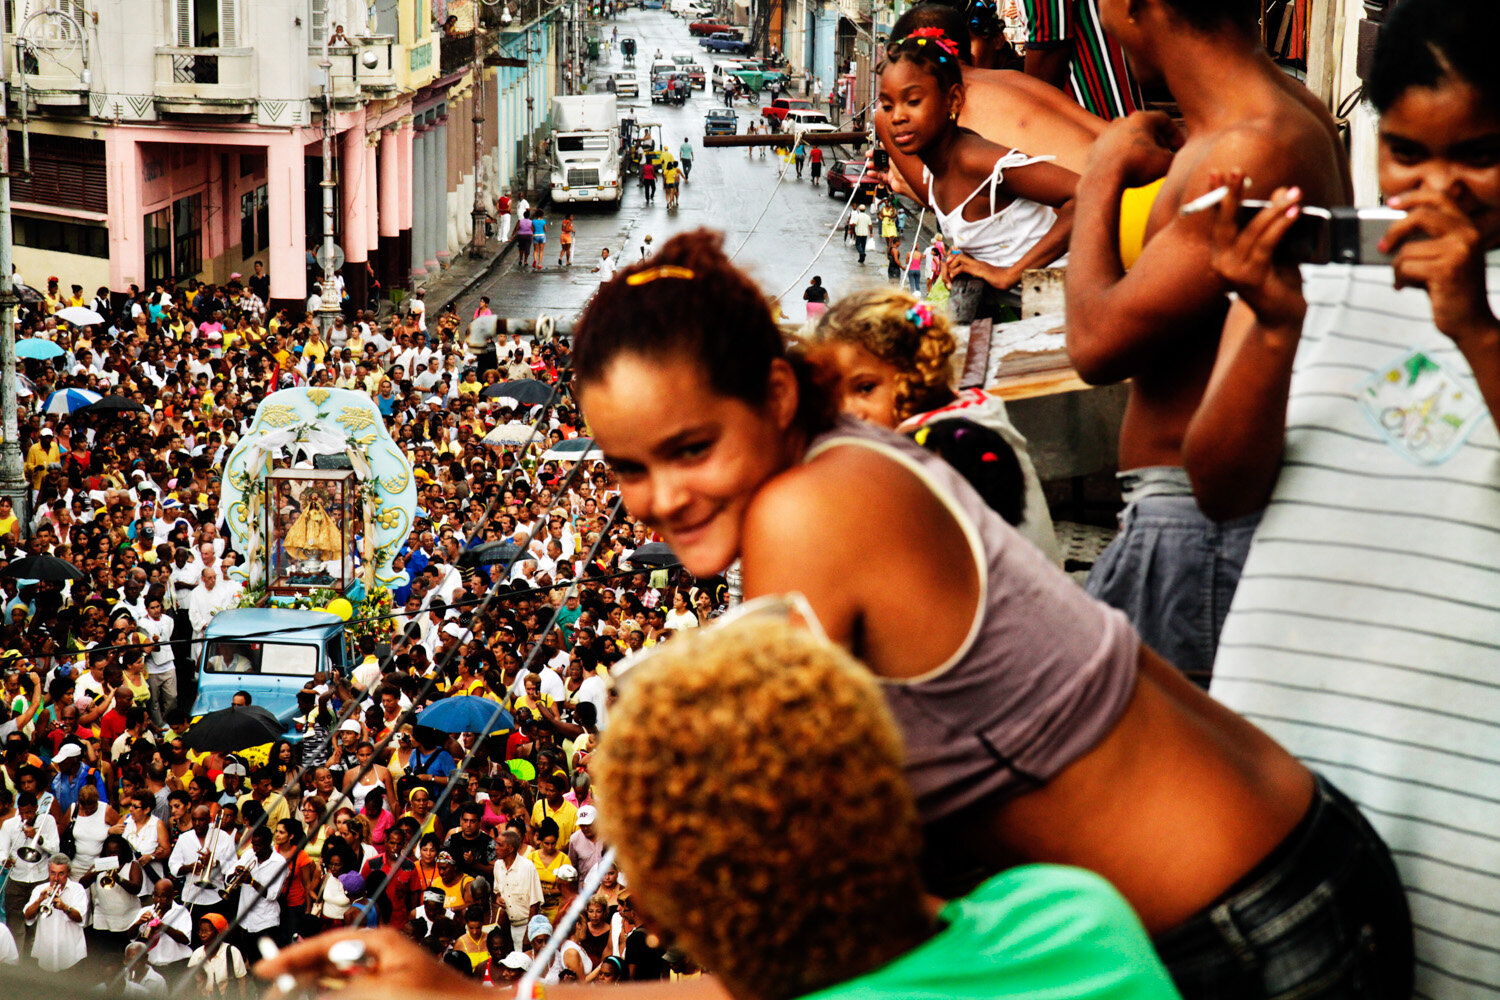  Cubans watch from a balcony as they worship the Virgen de la Caridad de Cobre, Cuba’s national saint, during a procession in Centro Habana, 2010                      